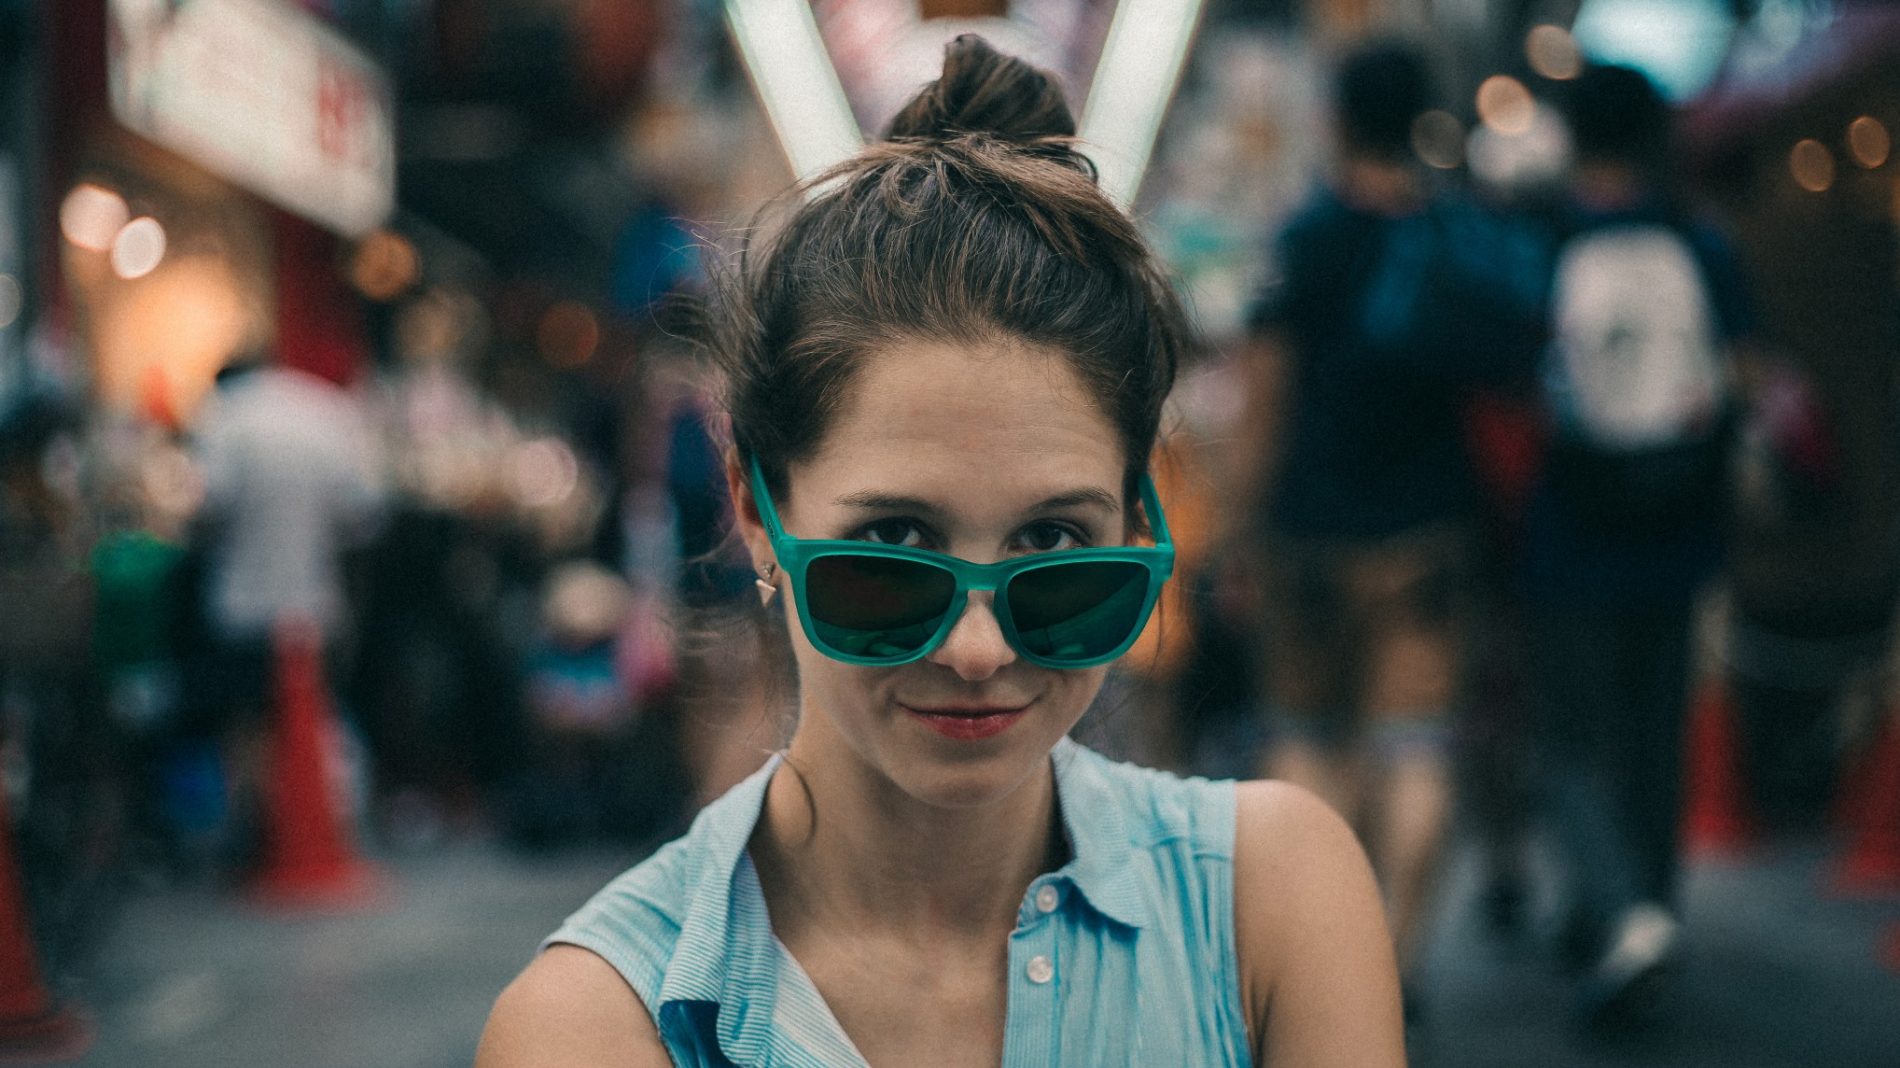 Portrait of a young person with sunglasses